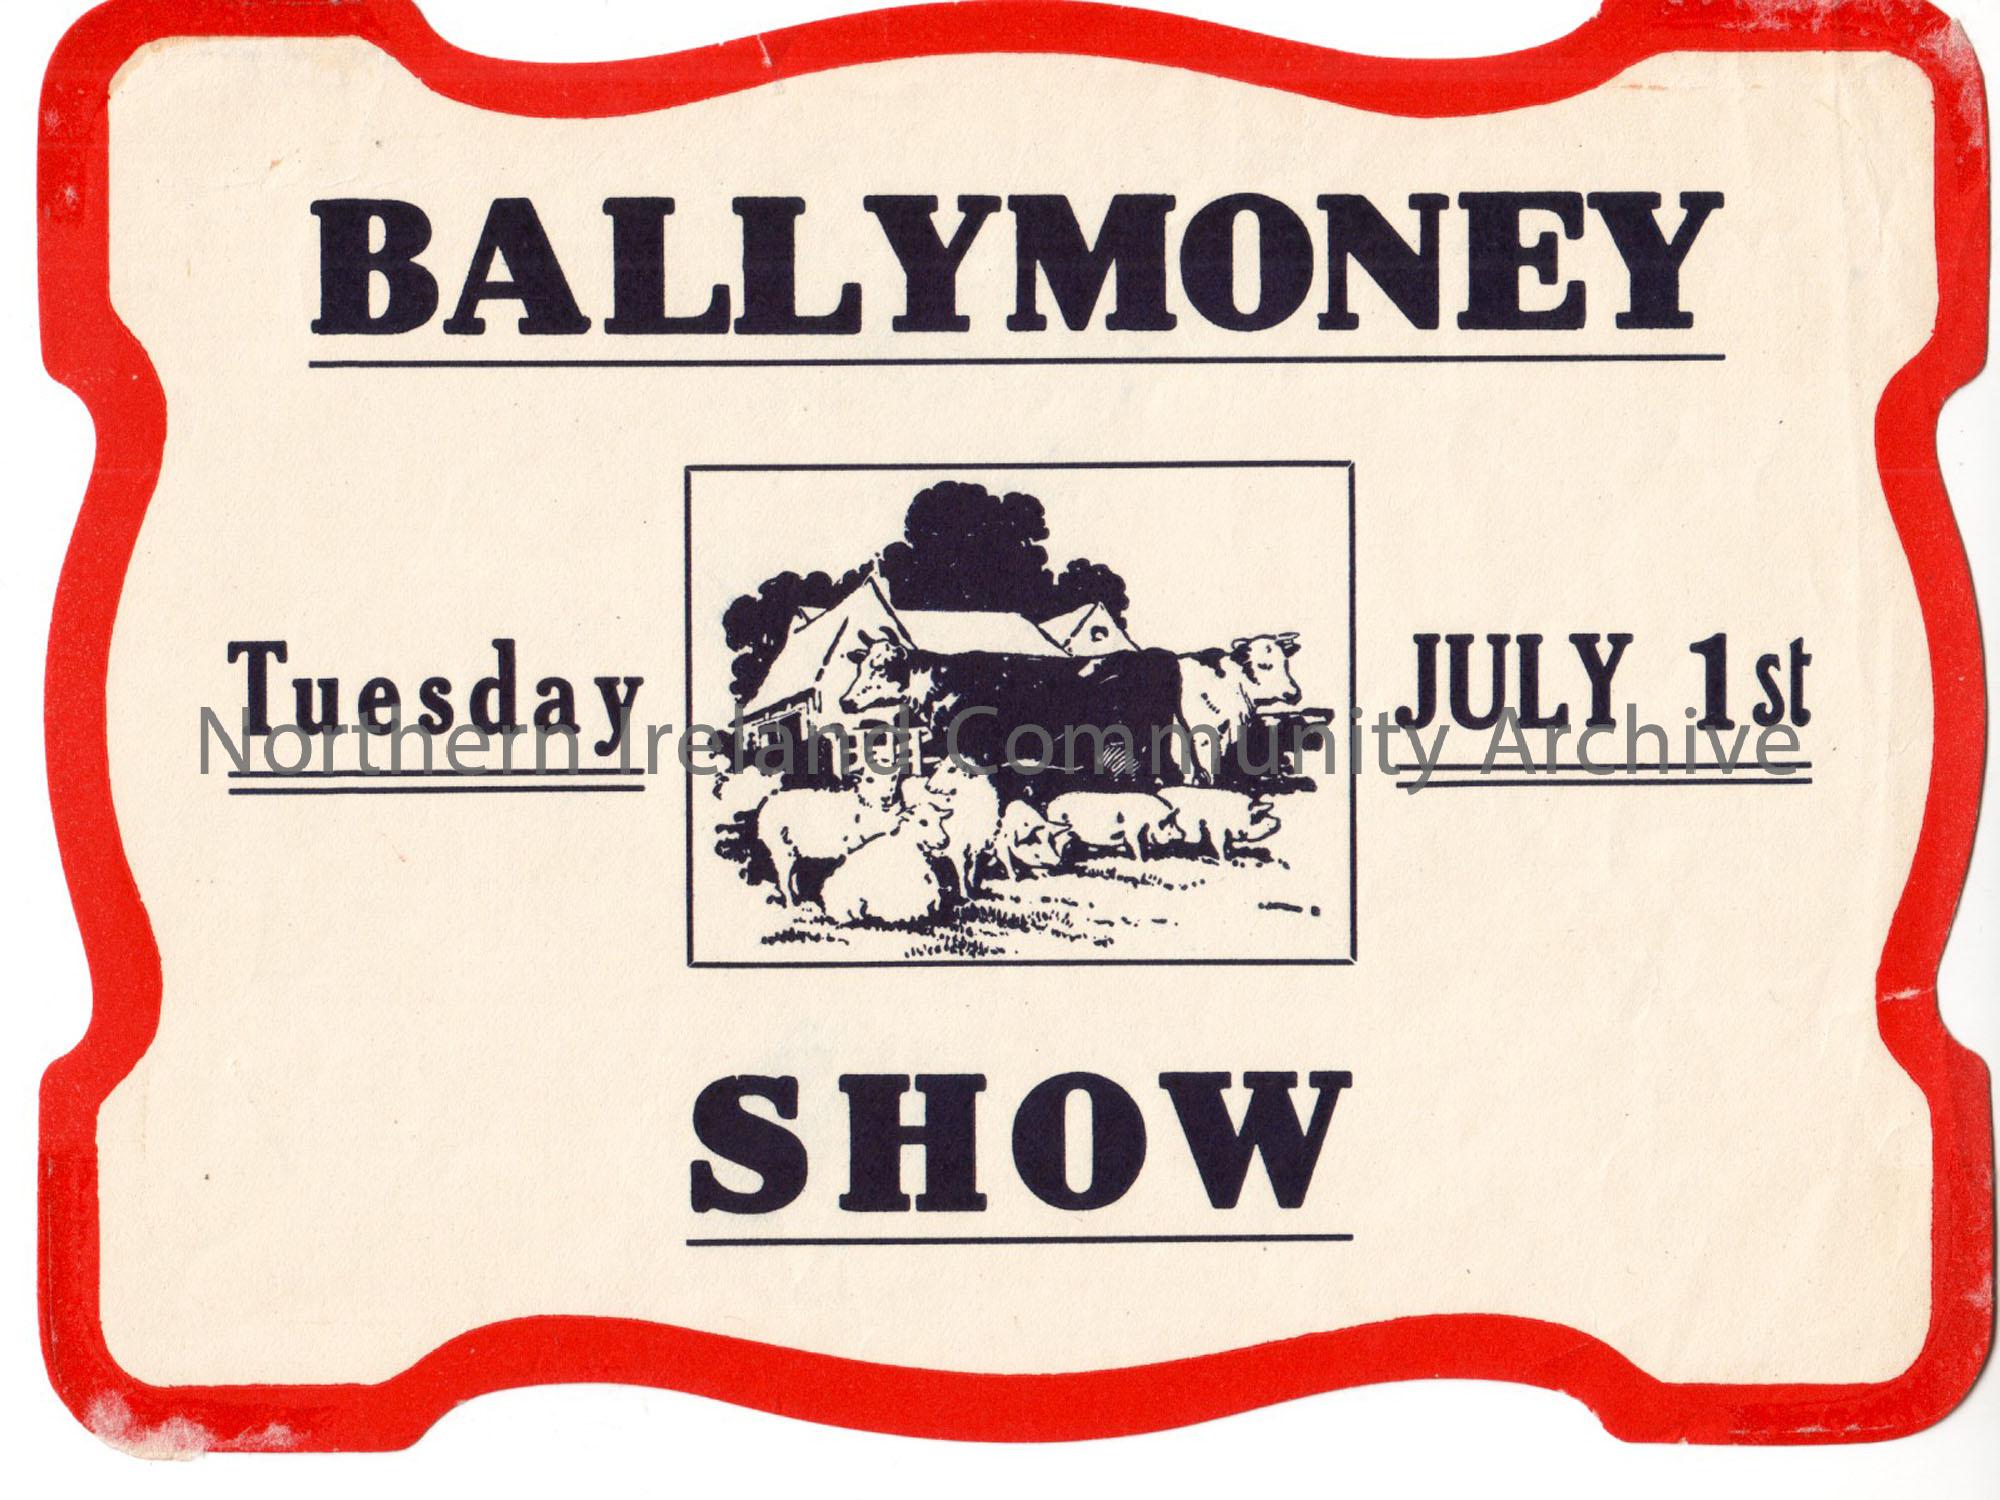 Advertising poster for the Ballymoney Show. Poster has a small farmyard scene on front. Tuesday July 1st